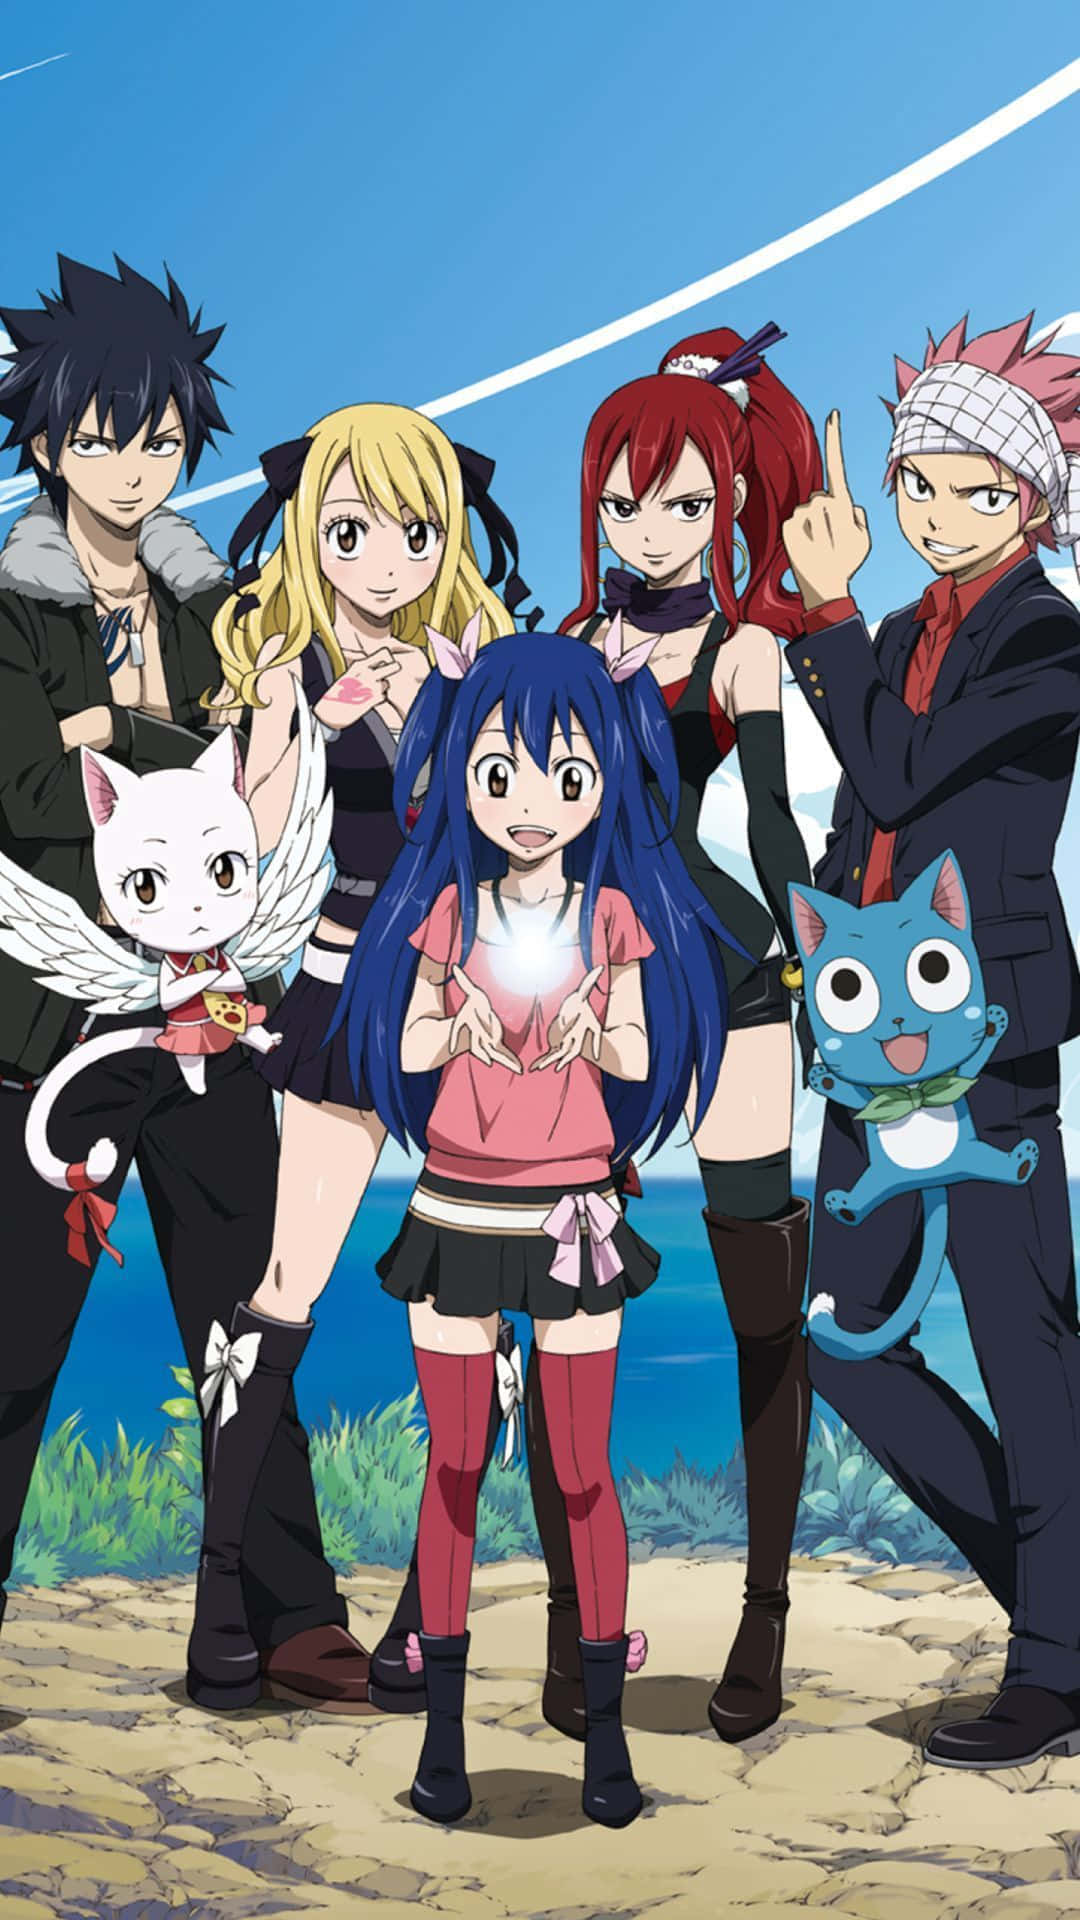 Welcome the Wizards of Fairy Tail